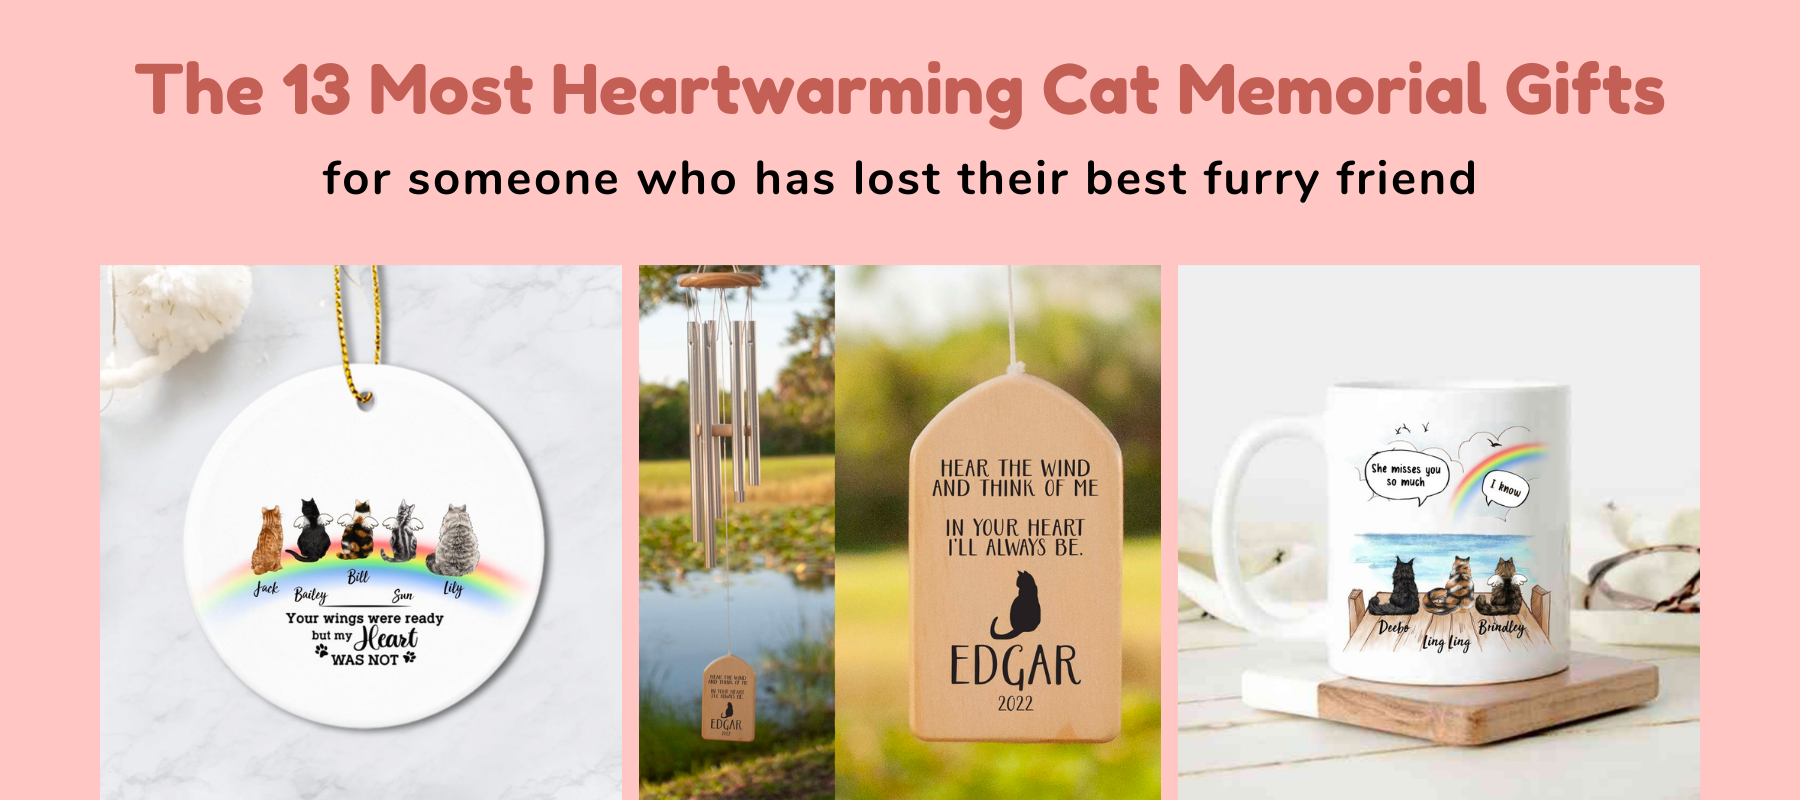 The 13 Most Heartwarming Cat Memorial Gifts for Someone Who Has Lost Their Best Furry Friend